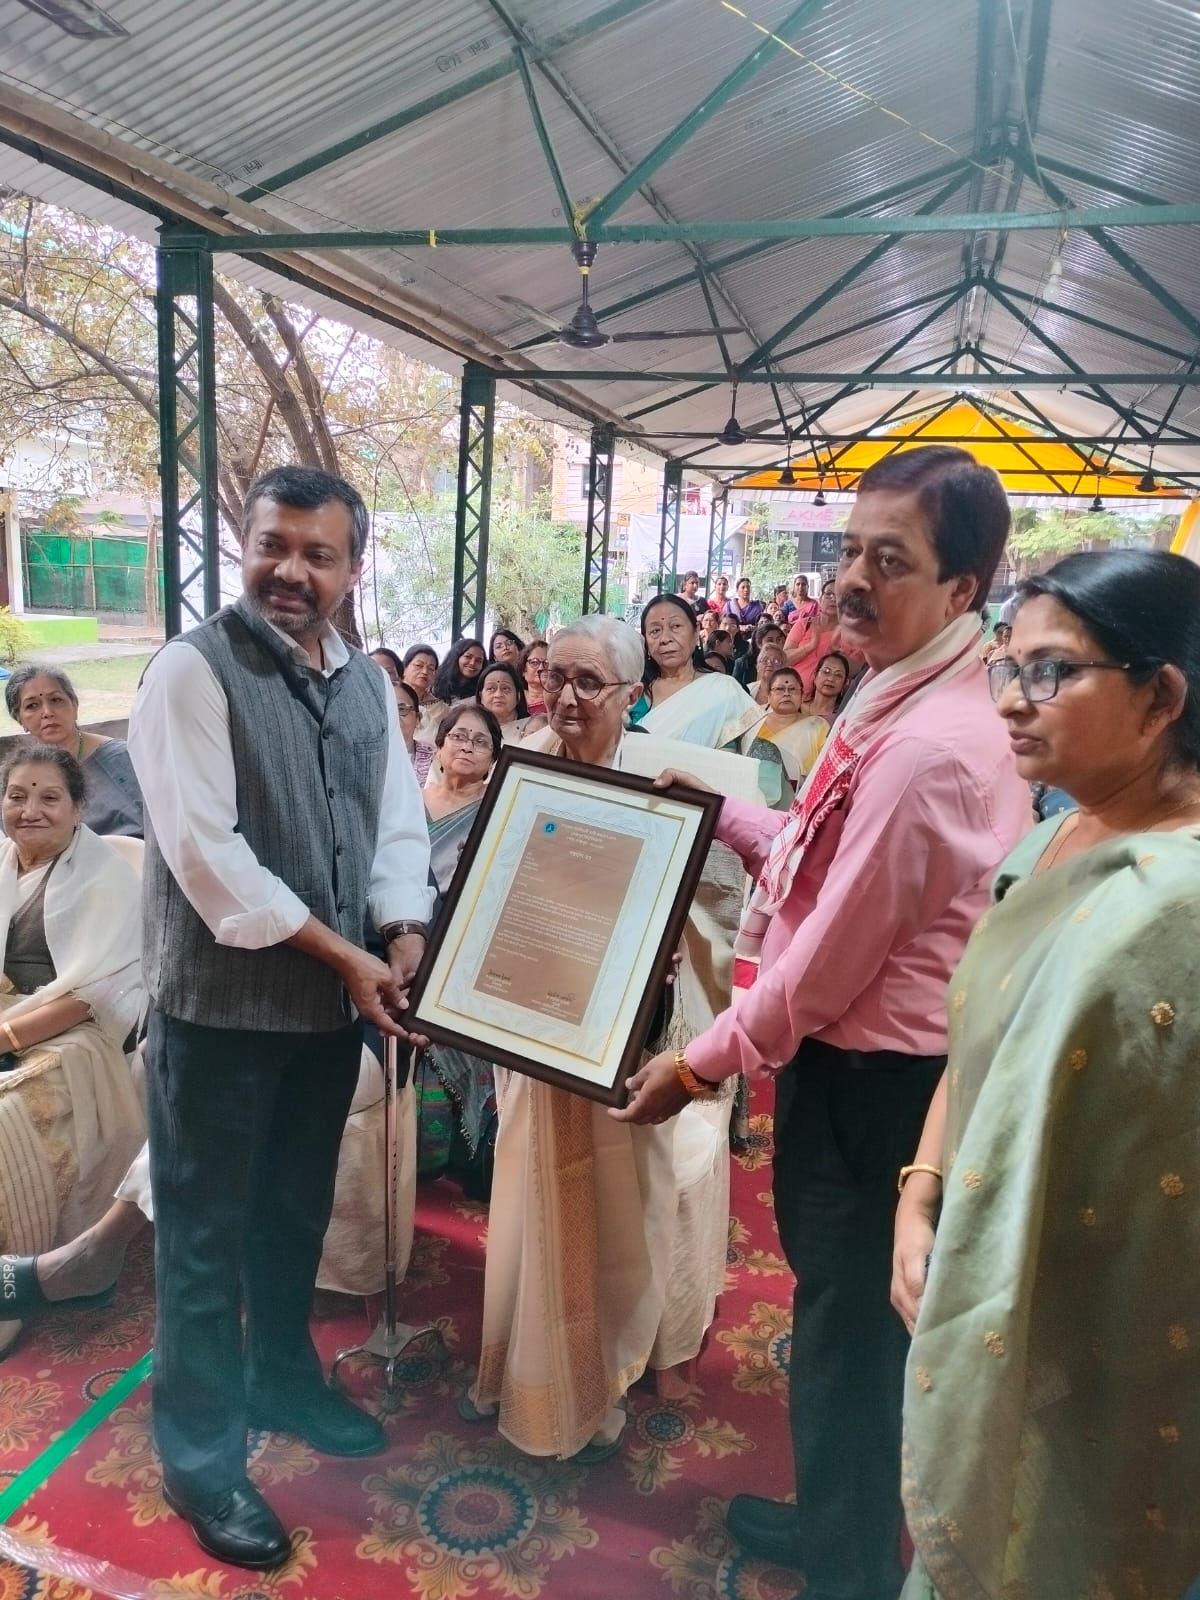 A Public Exhibition on Sisters of Tezpur (Revisiting the Golden History of Tezpur Mahila Samiti) was organized from 16th to 18th March, 2023 